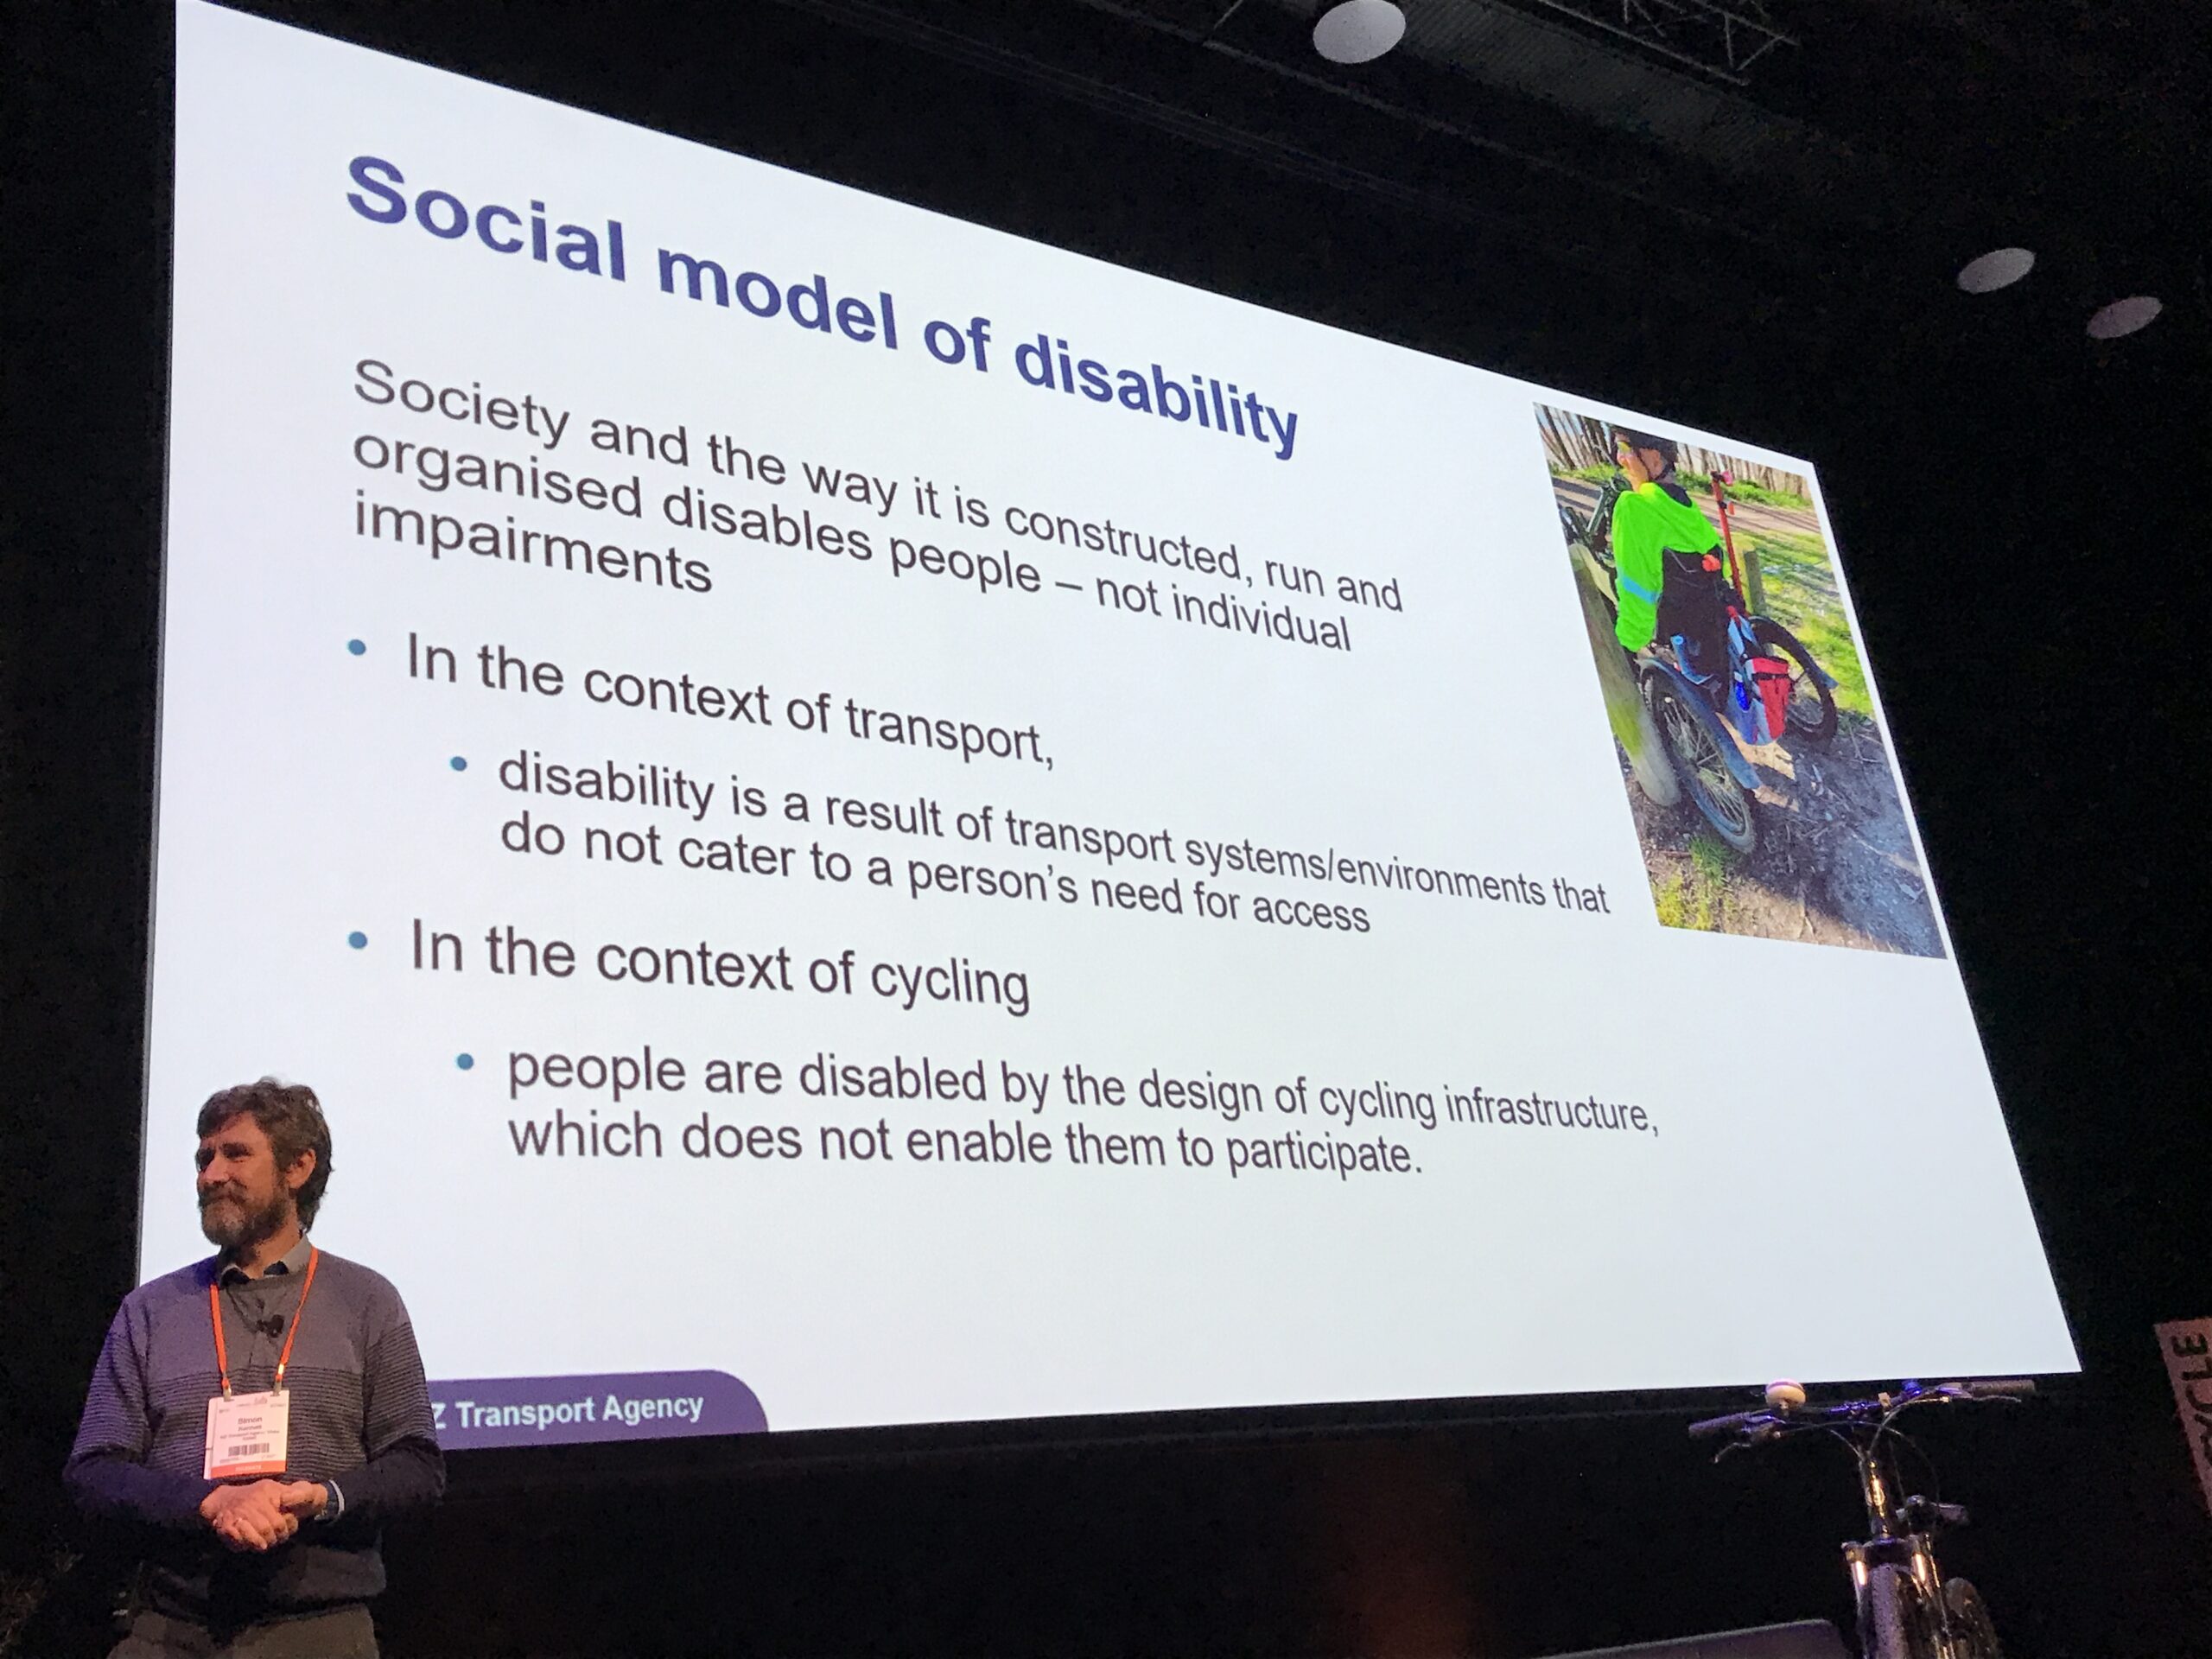 The slide behind Simon Kennett says "Social model of disability. Society and the way it is constructed, run and organised disables people - not individual impairments. In the context of transport disability is a result of transport systems/environments that do not cater to a person's need for access. In the context of cycling people are disabled by the design of cycling infrastructure which does not enable them to participate. 